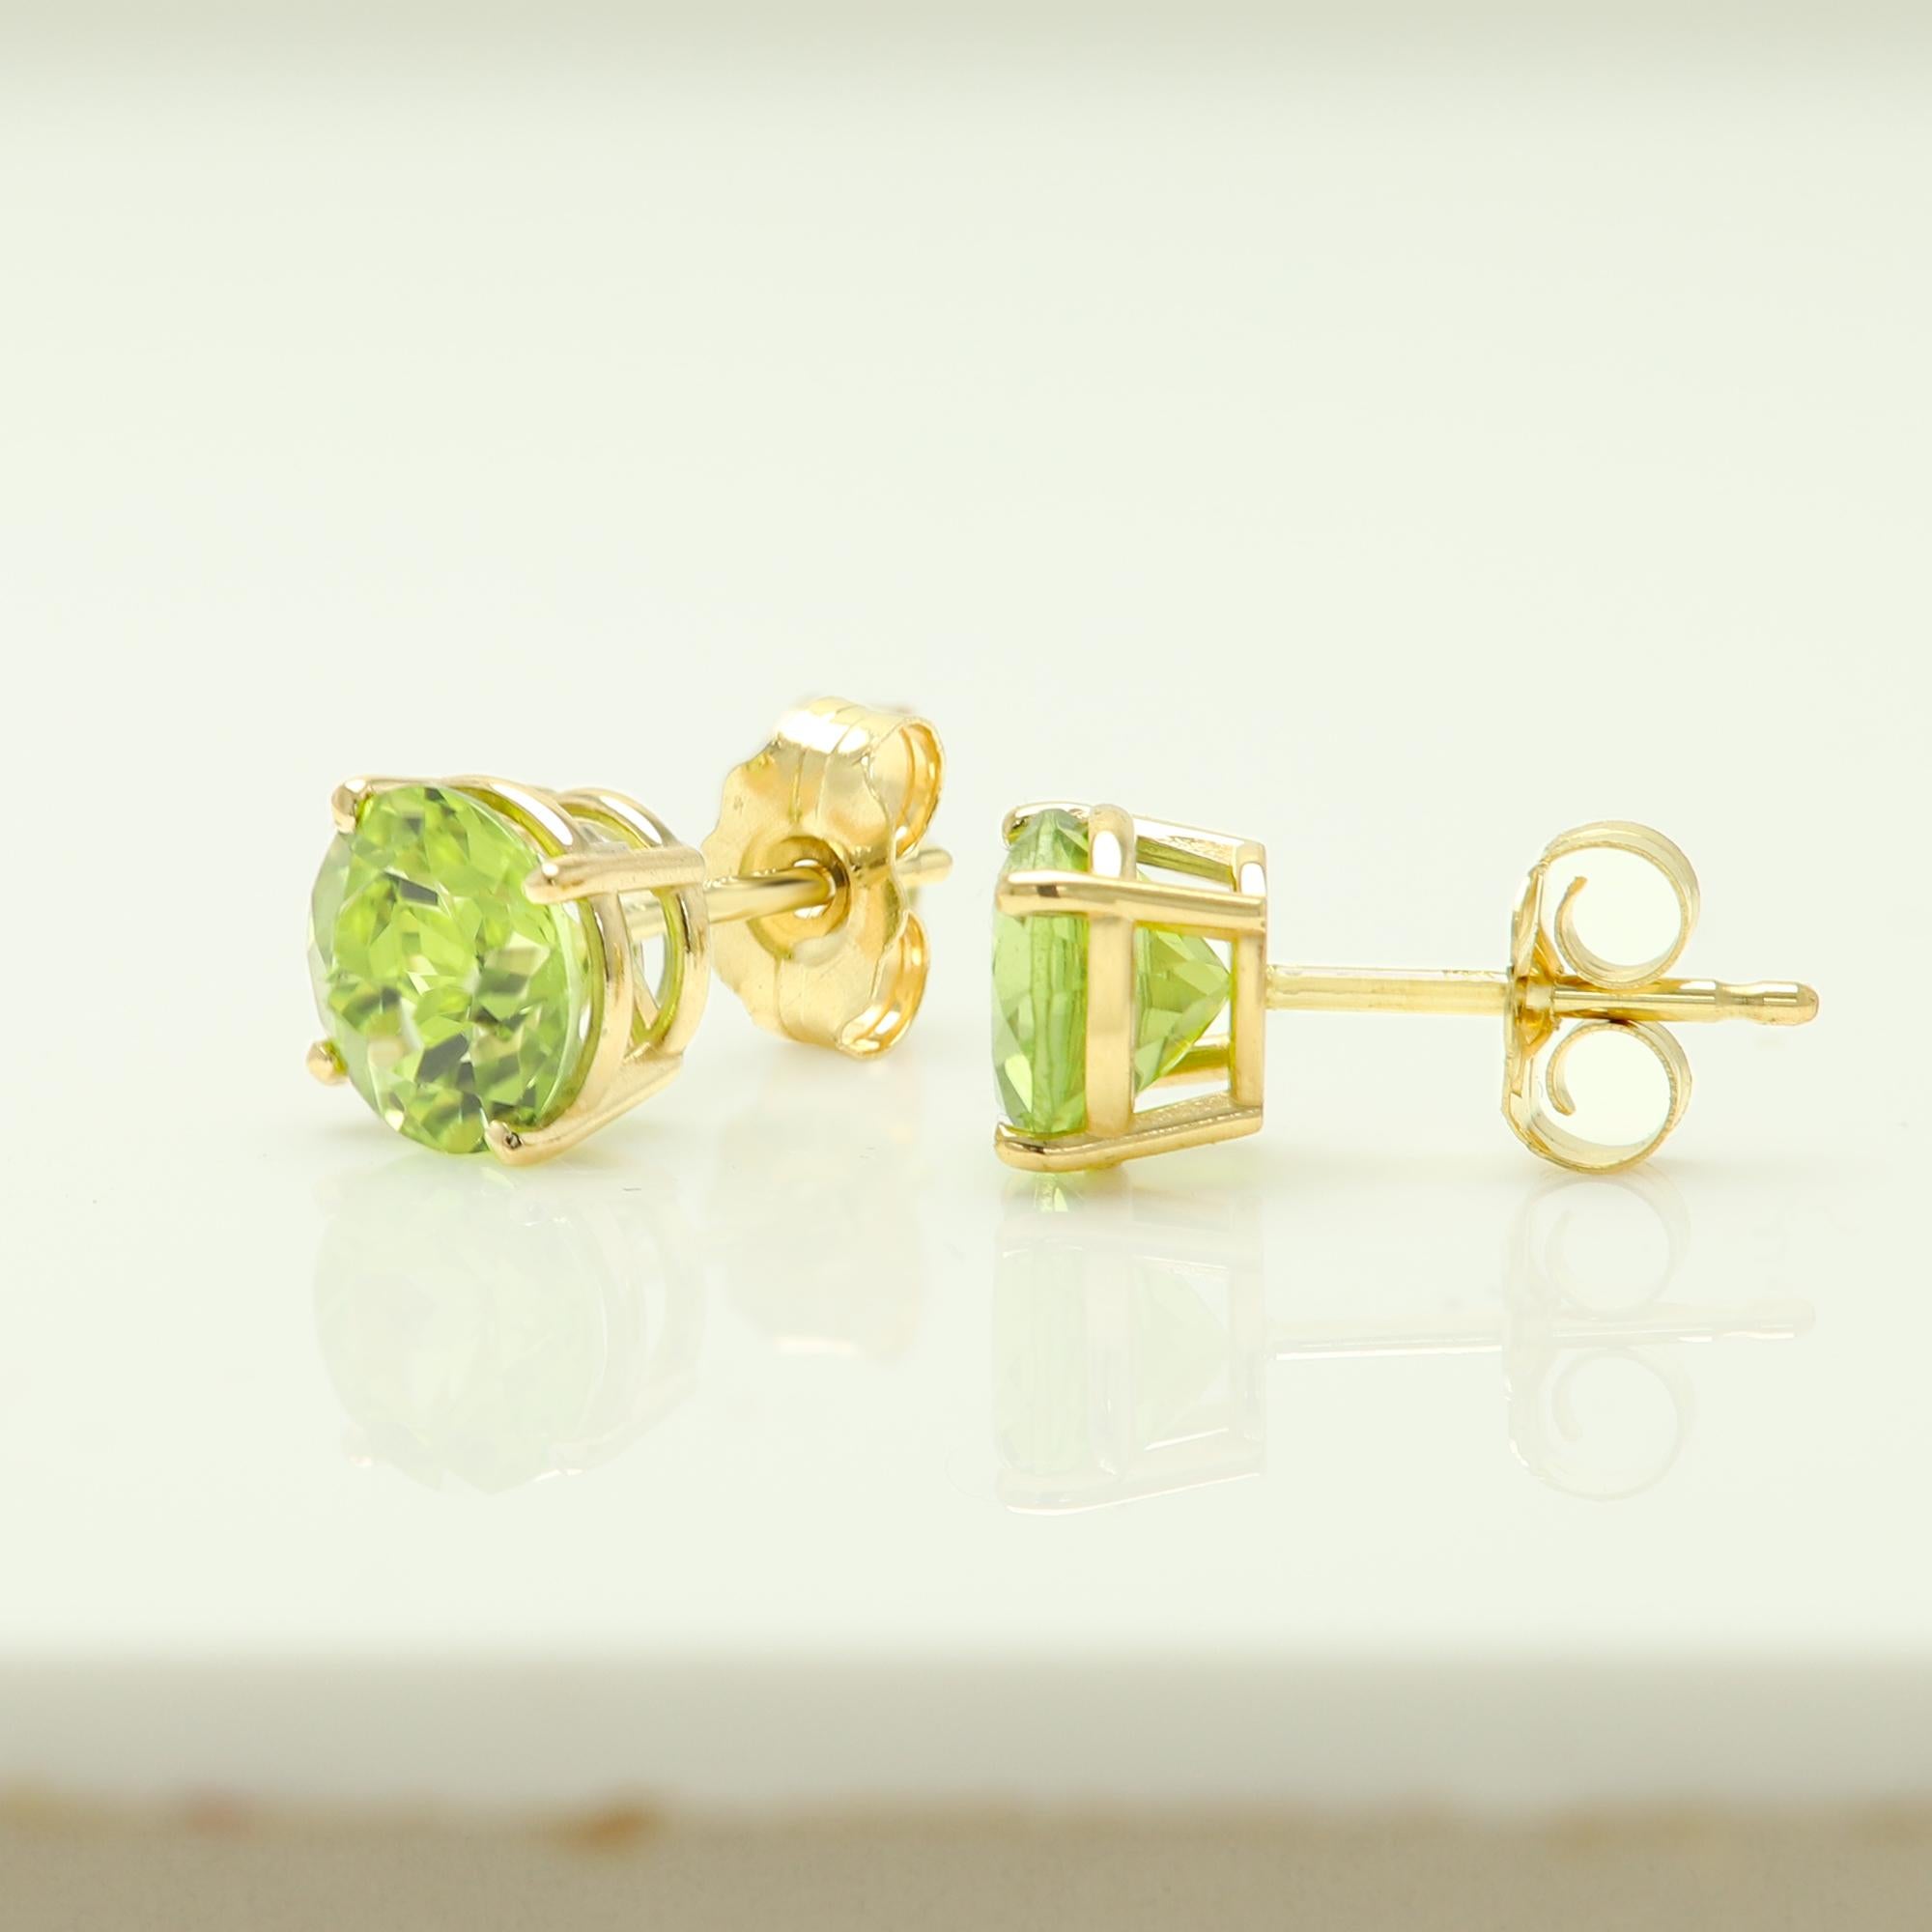 Natural Peridot Gem Earring Studs
Approx. 6.0mm / 0.90 carat - each stone
The Actual color is similar to light green with a pint of yellow. 
Simple but Elegant and real natural gems 
Solid 14k yellow Gold approx weight 1.20 grams
with push back